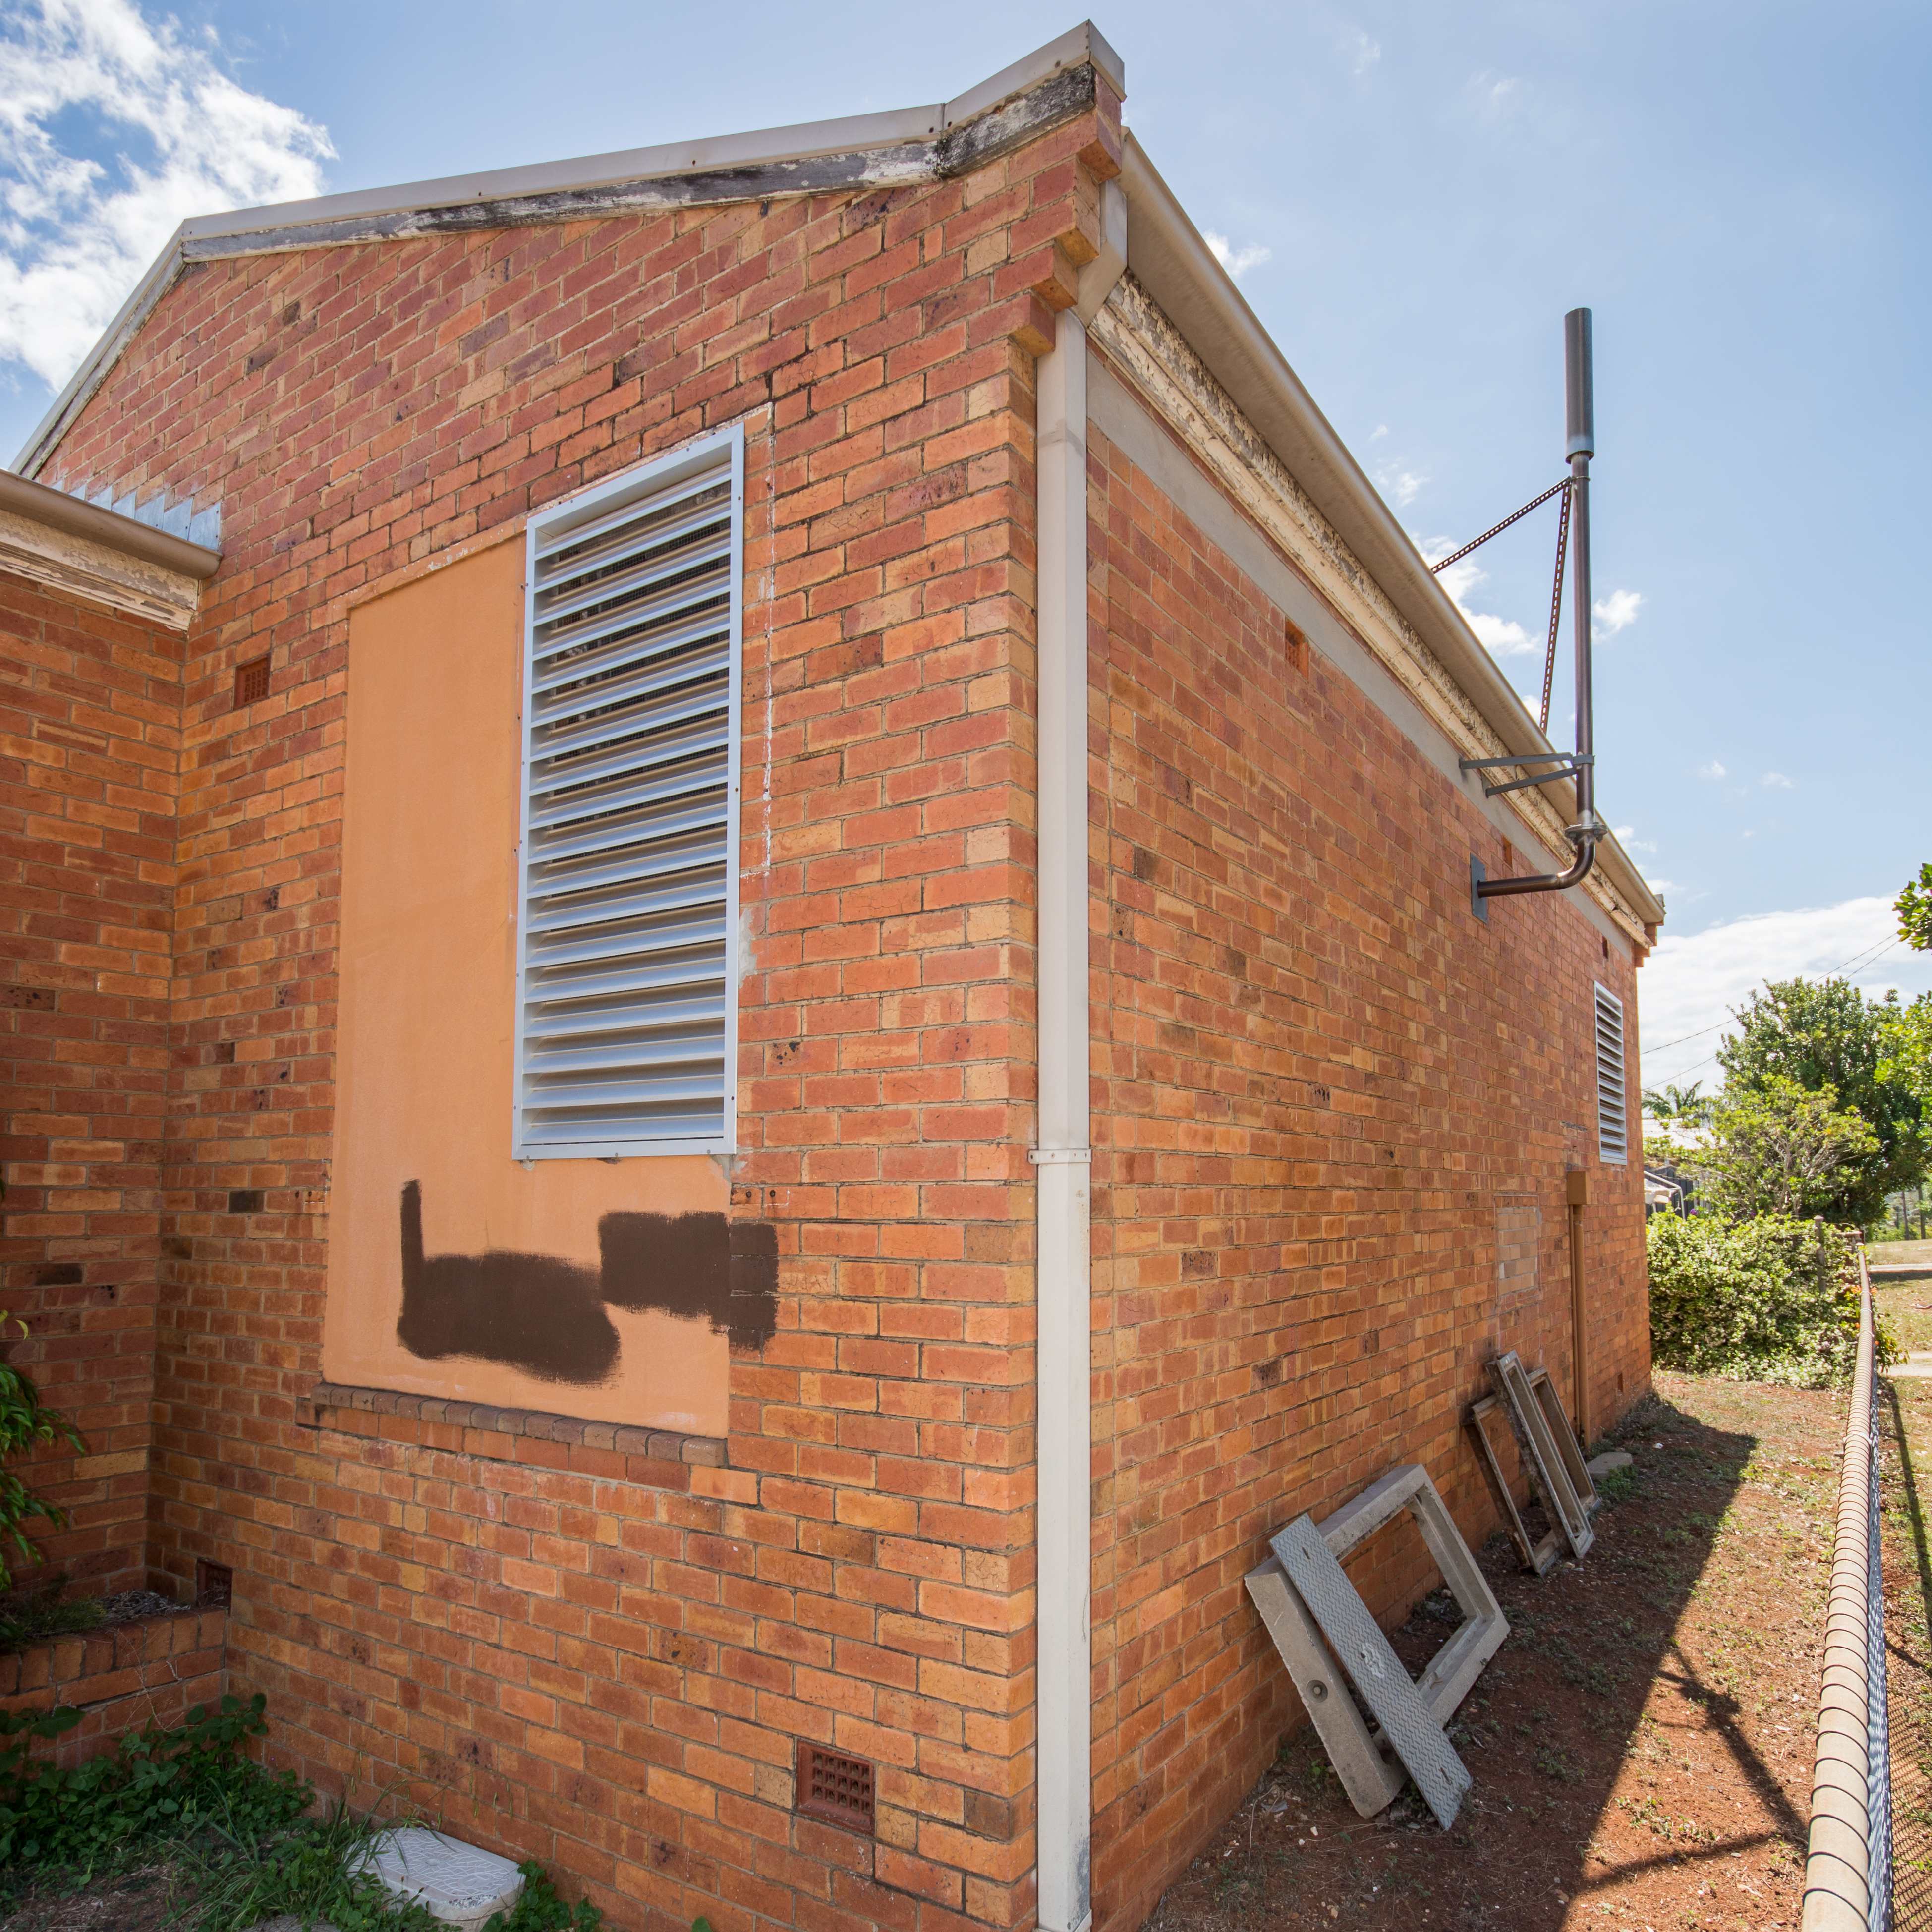 This is an image of the local heritage place known as Nudgee Telephone Exchange.